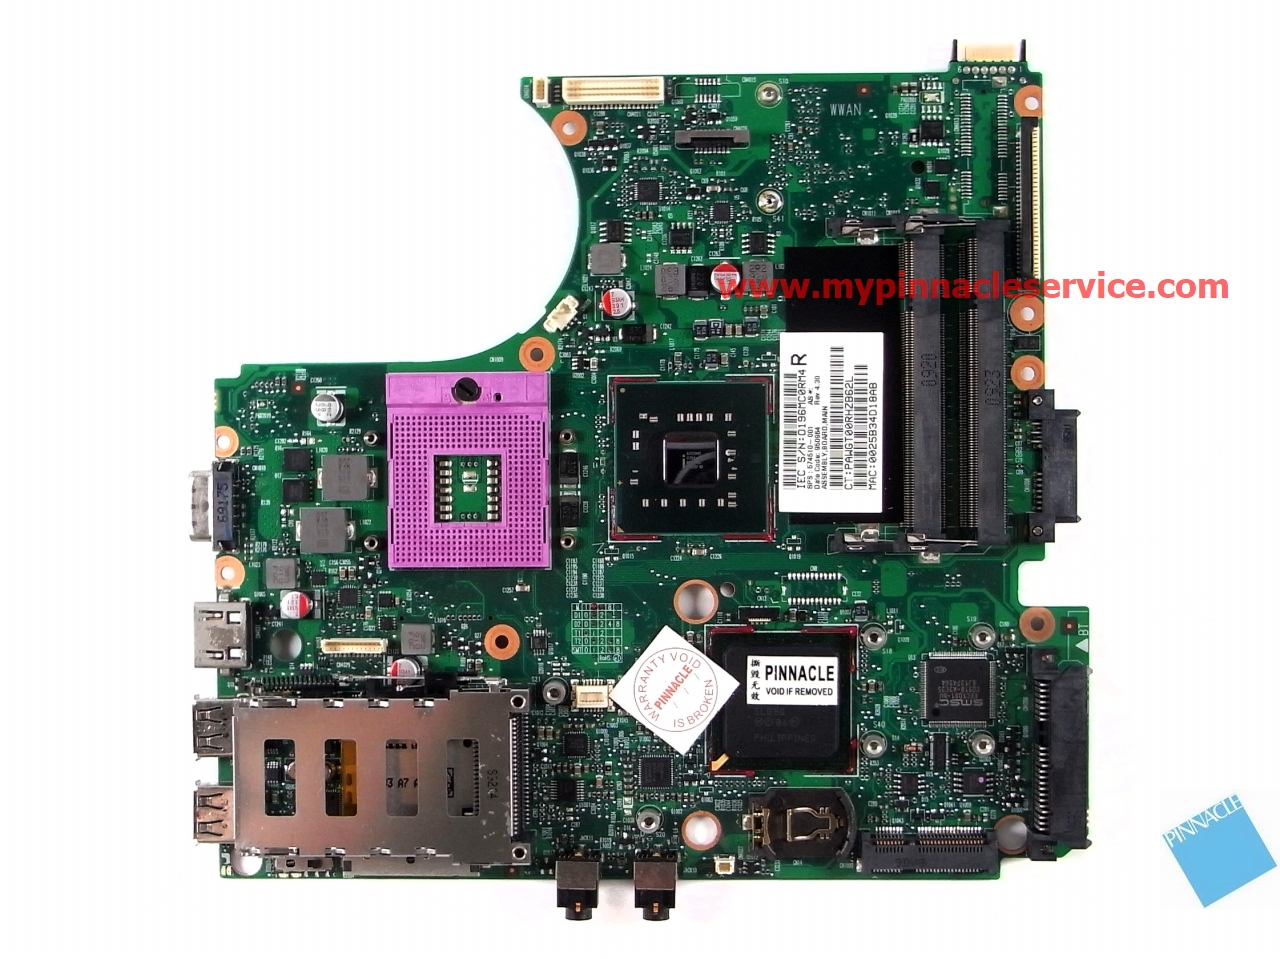 574510-001-motherboard-for-hp-probook-4410s-4411s-4510s-4311s-6050a2252601-rimg0037.jpg